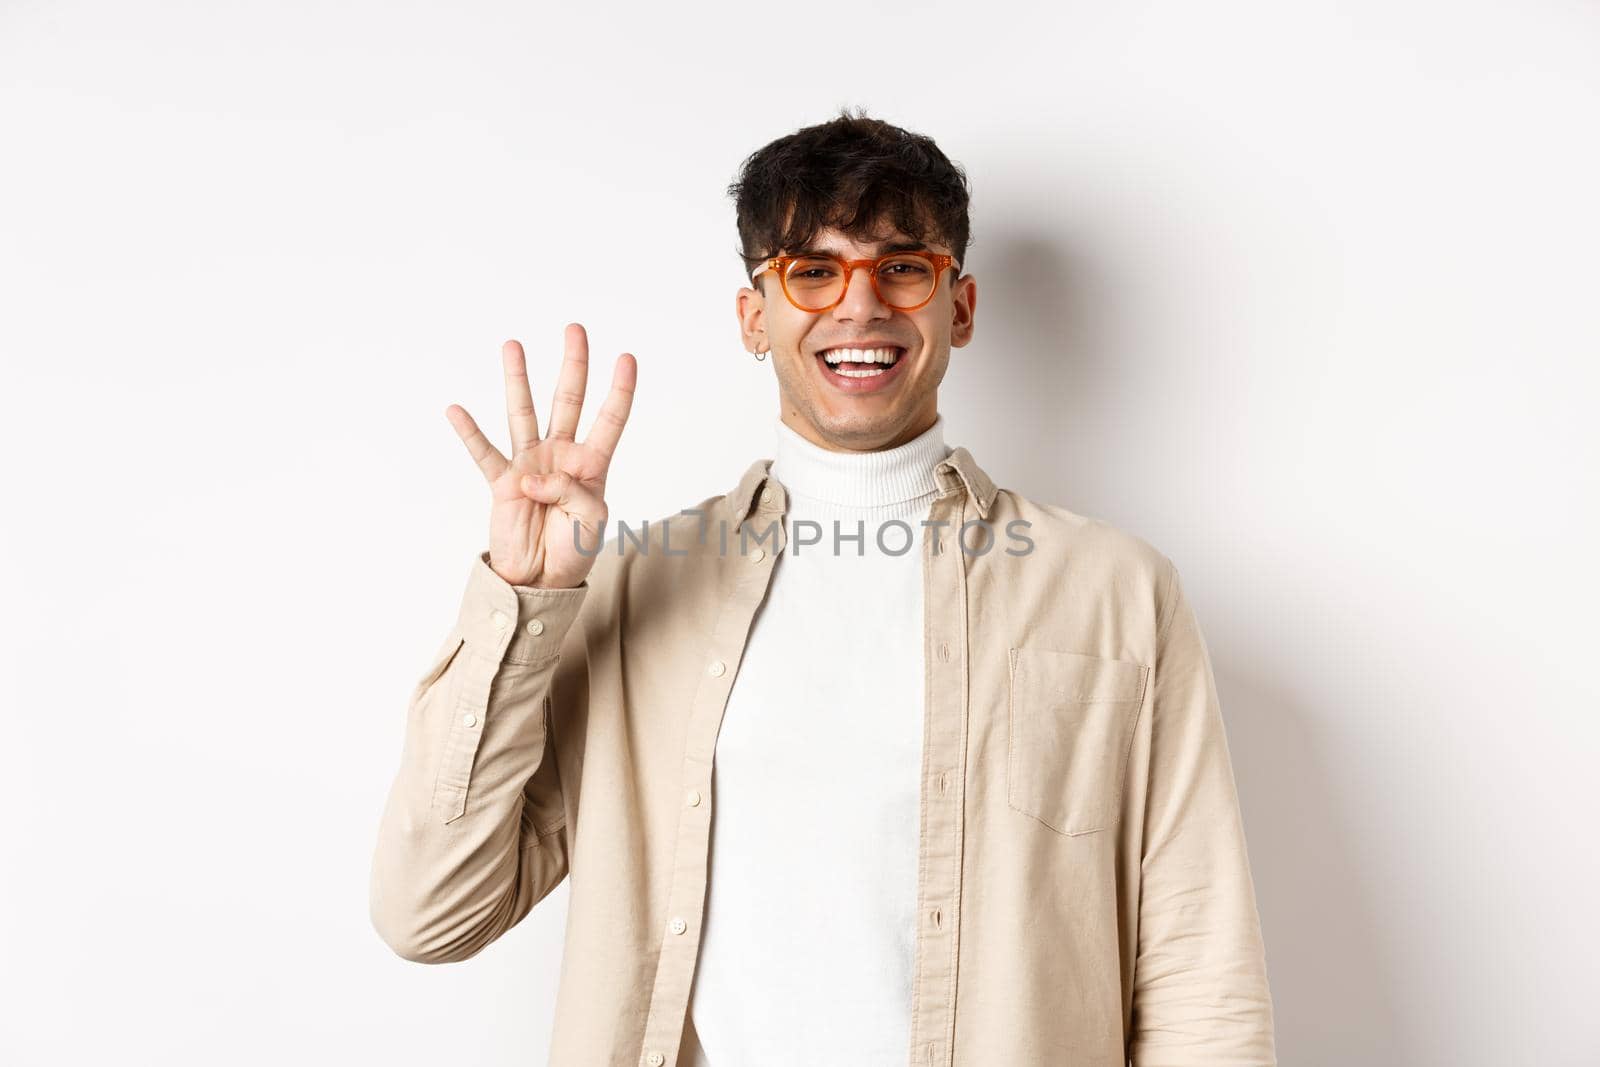 Handsome young man making order, showing number four fingers and smiling, standing on white background.